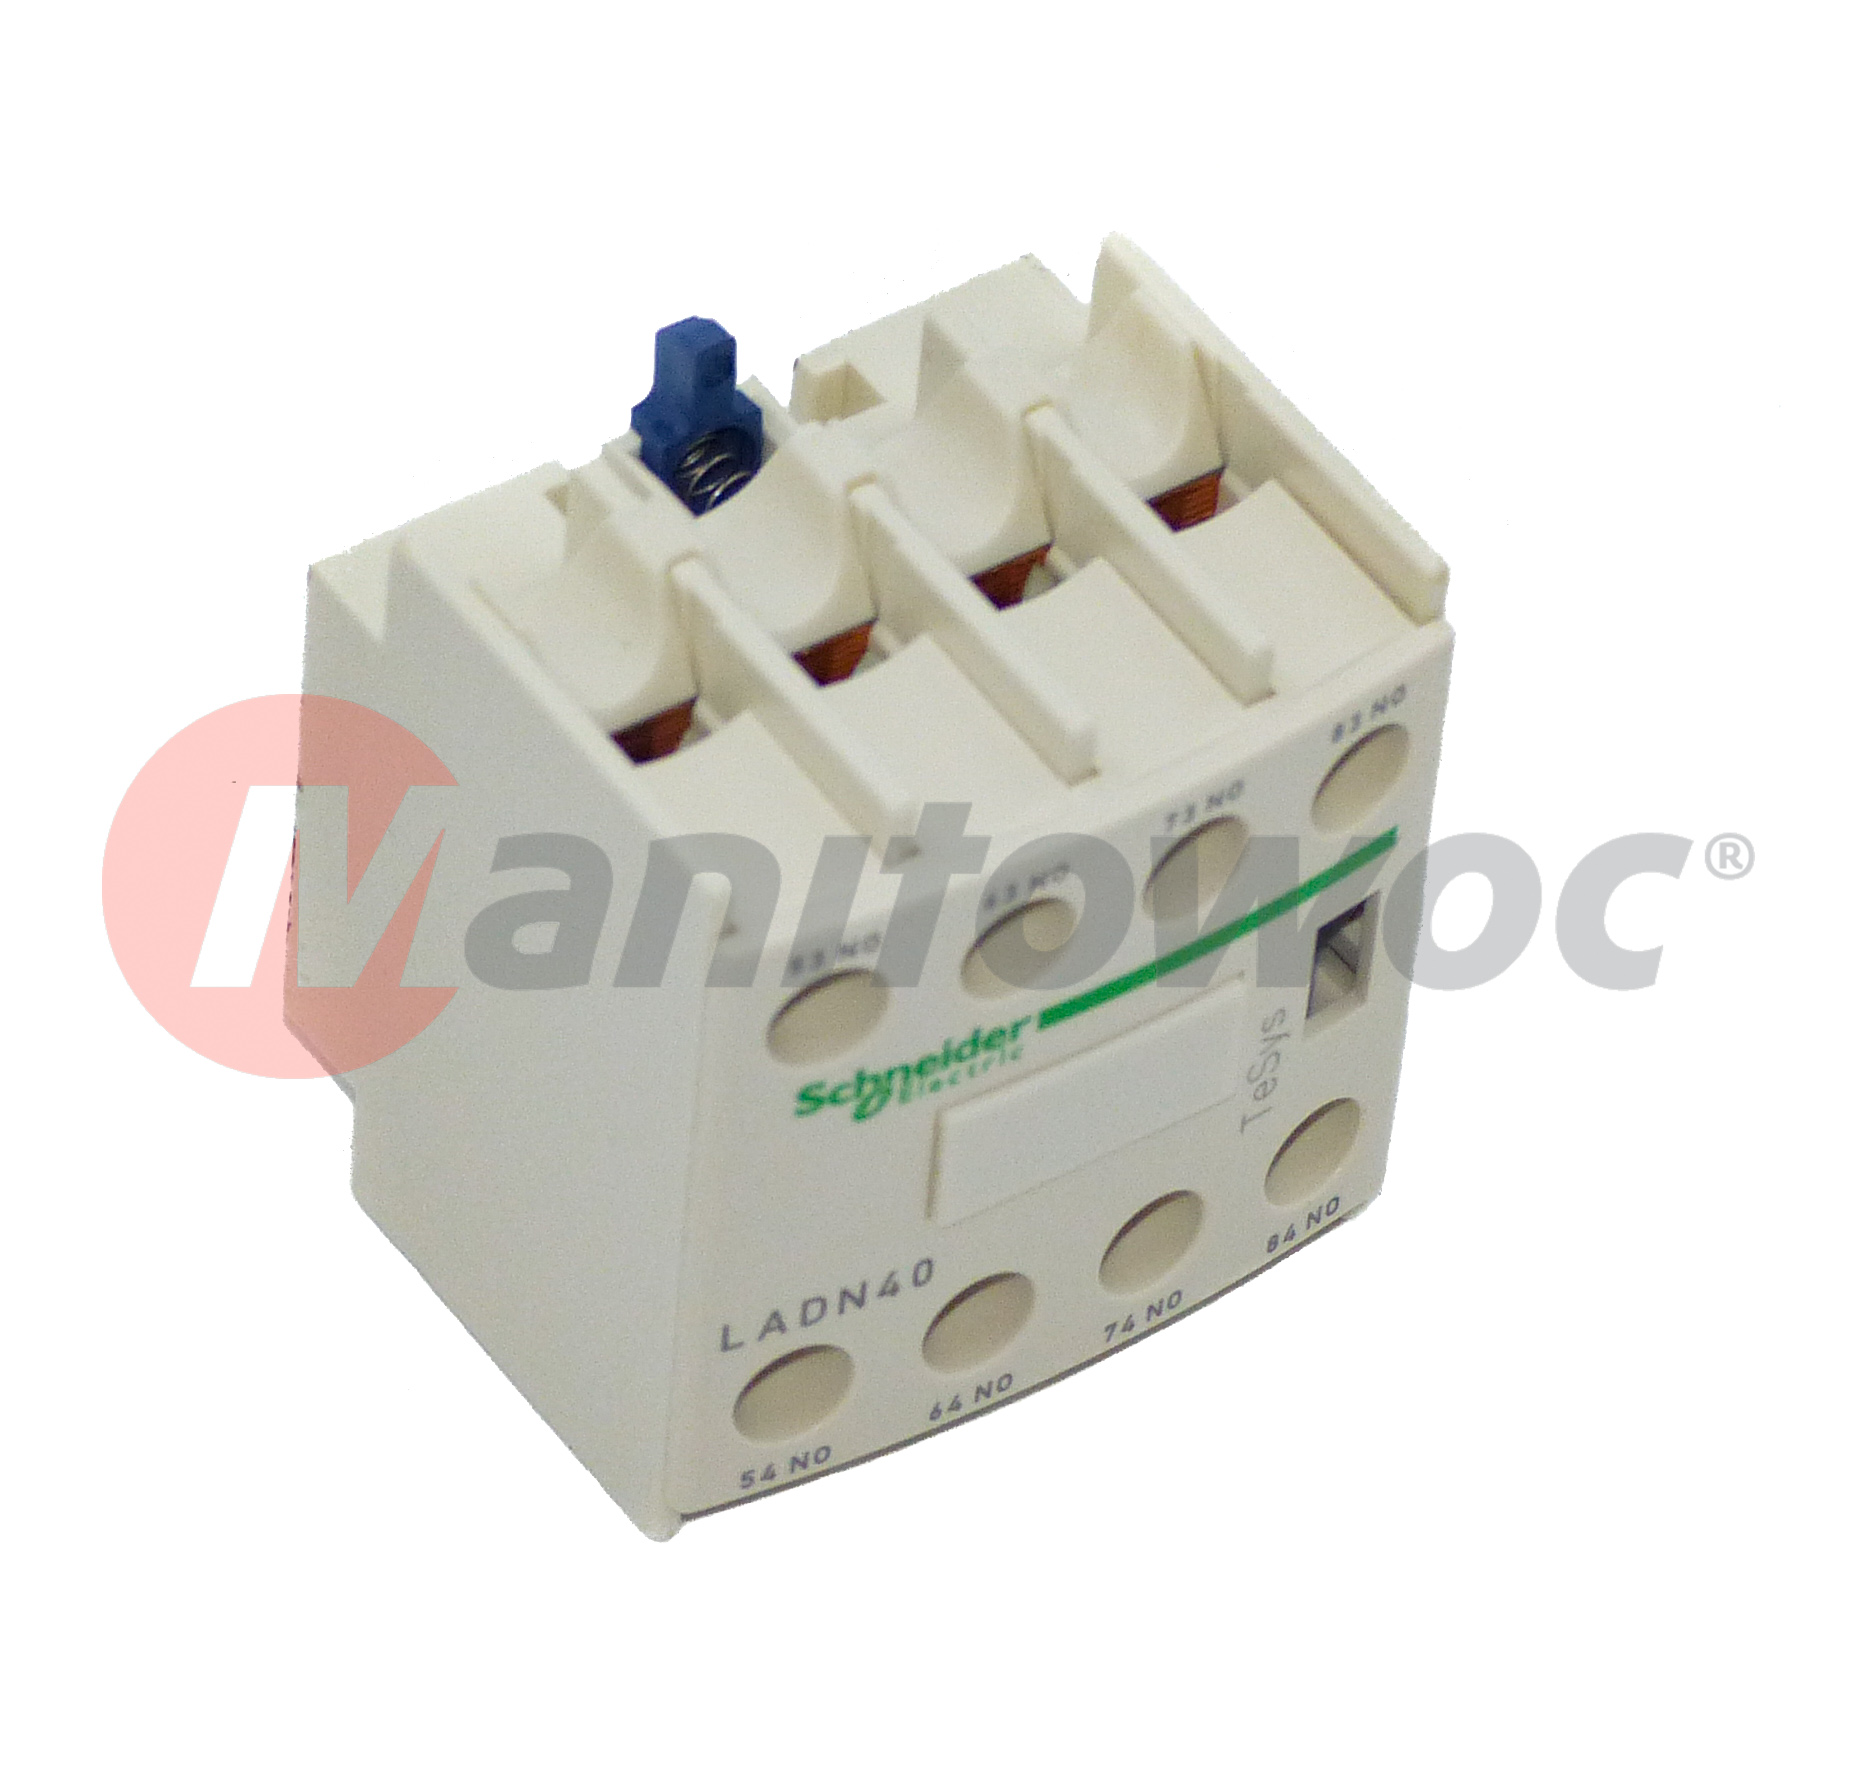 8 701 0022 - "AUXILIARY BLOCK 2F+20 FRONT"